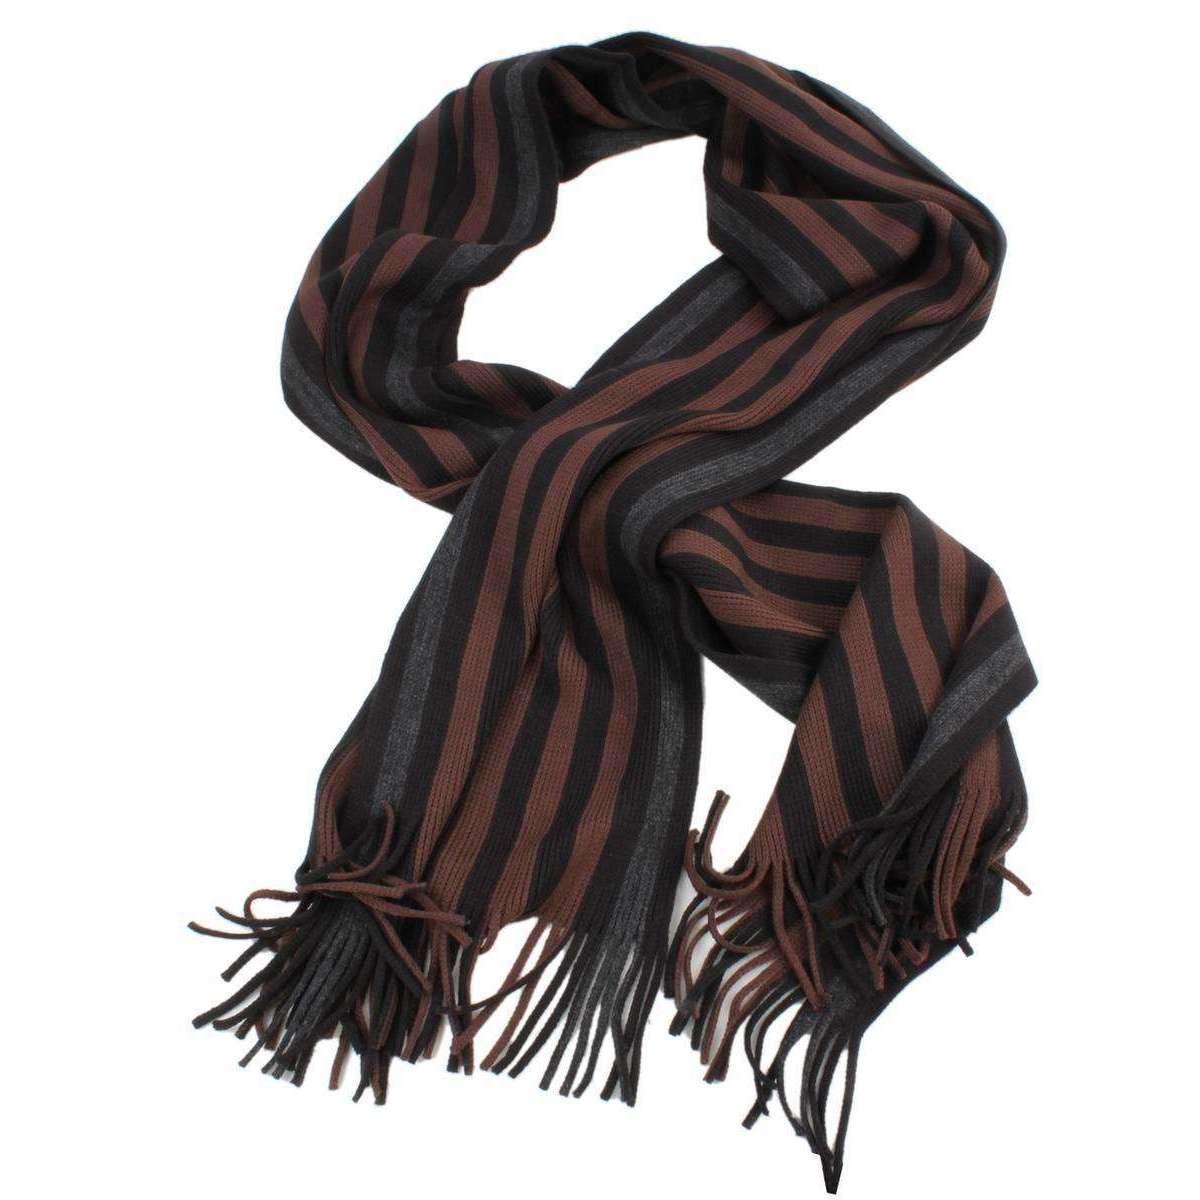 Bassin and Brown Grace Stripe Scarf - Brown/Black/Blue